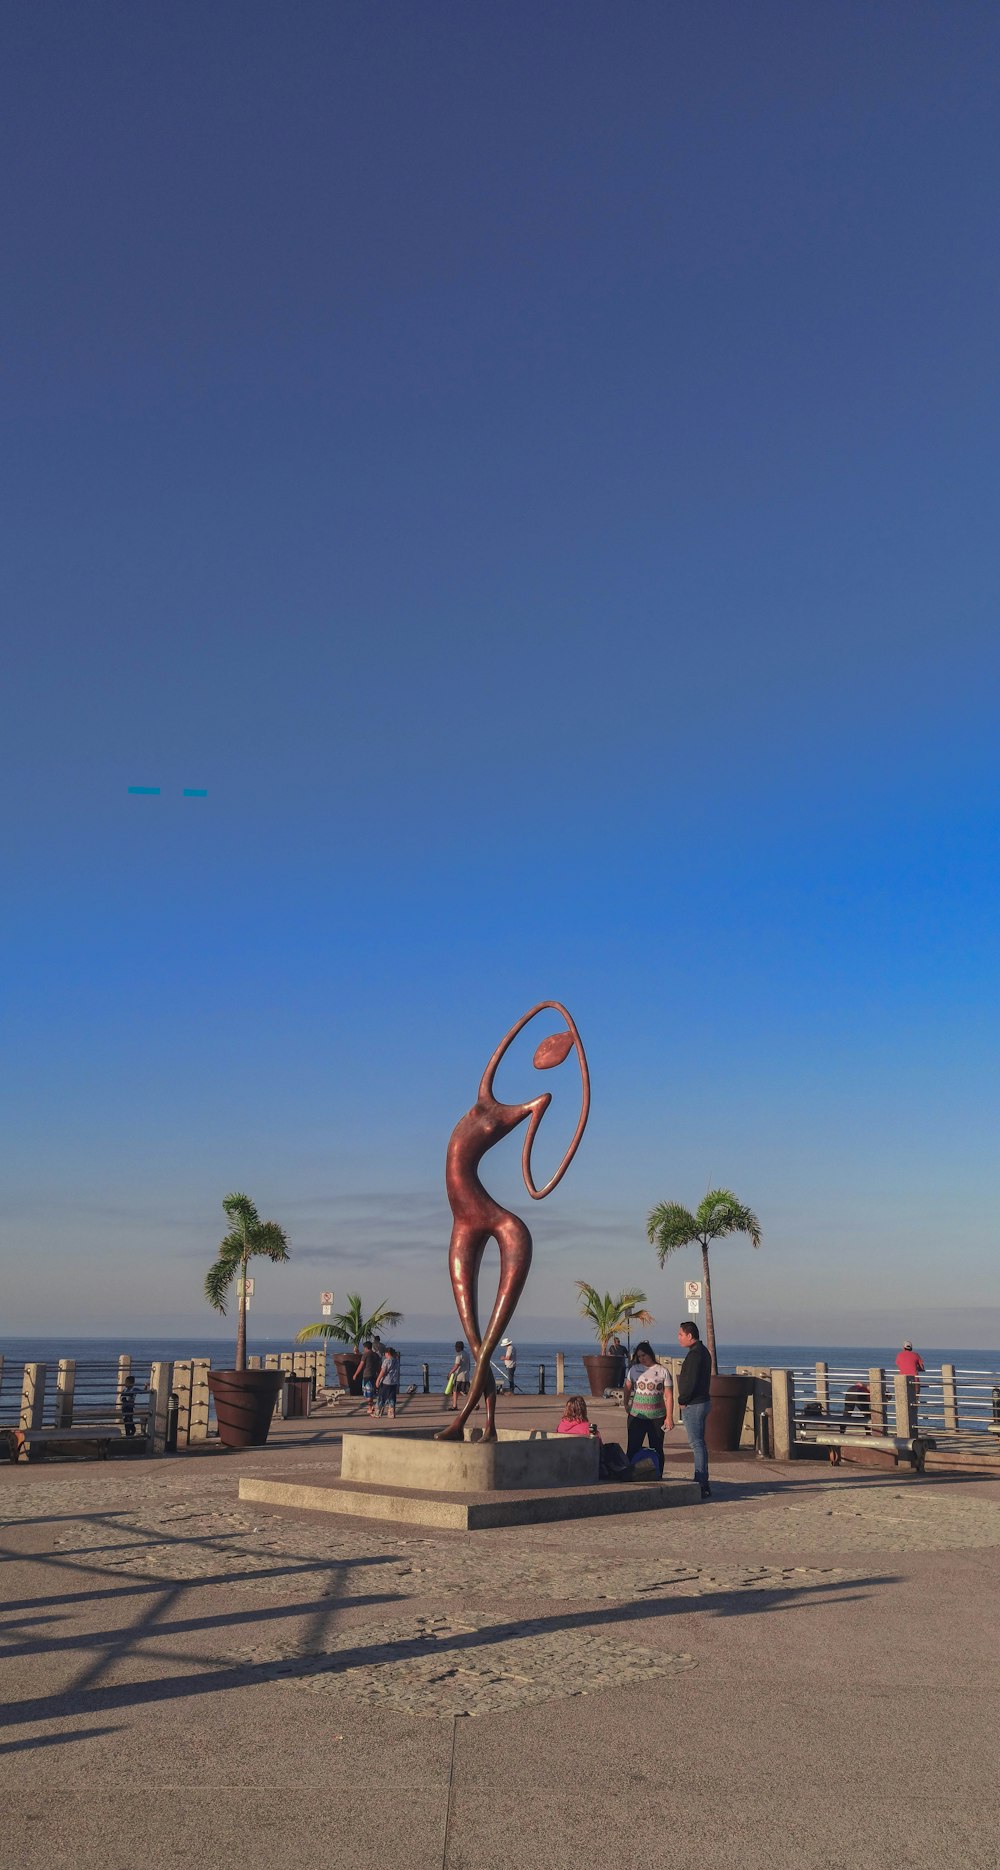 brown wooden flamingo statue near body of water during daytime